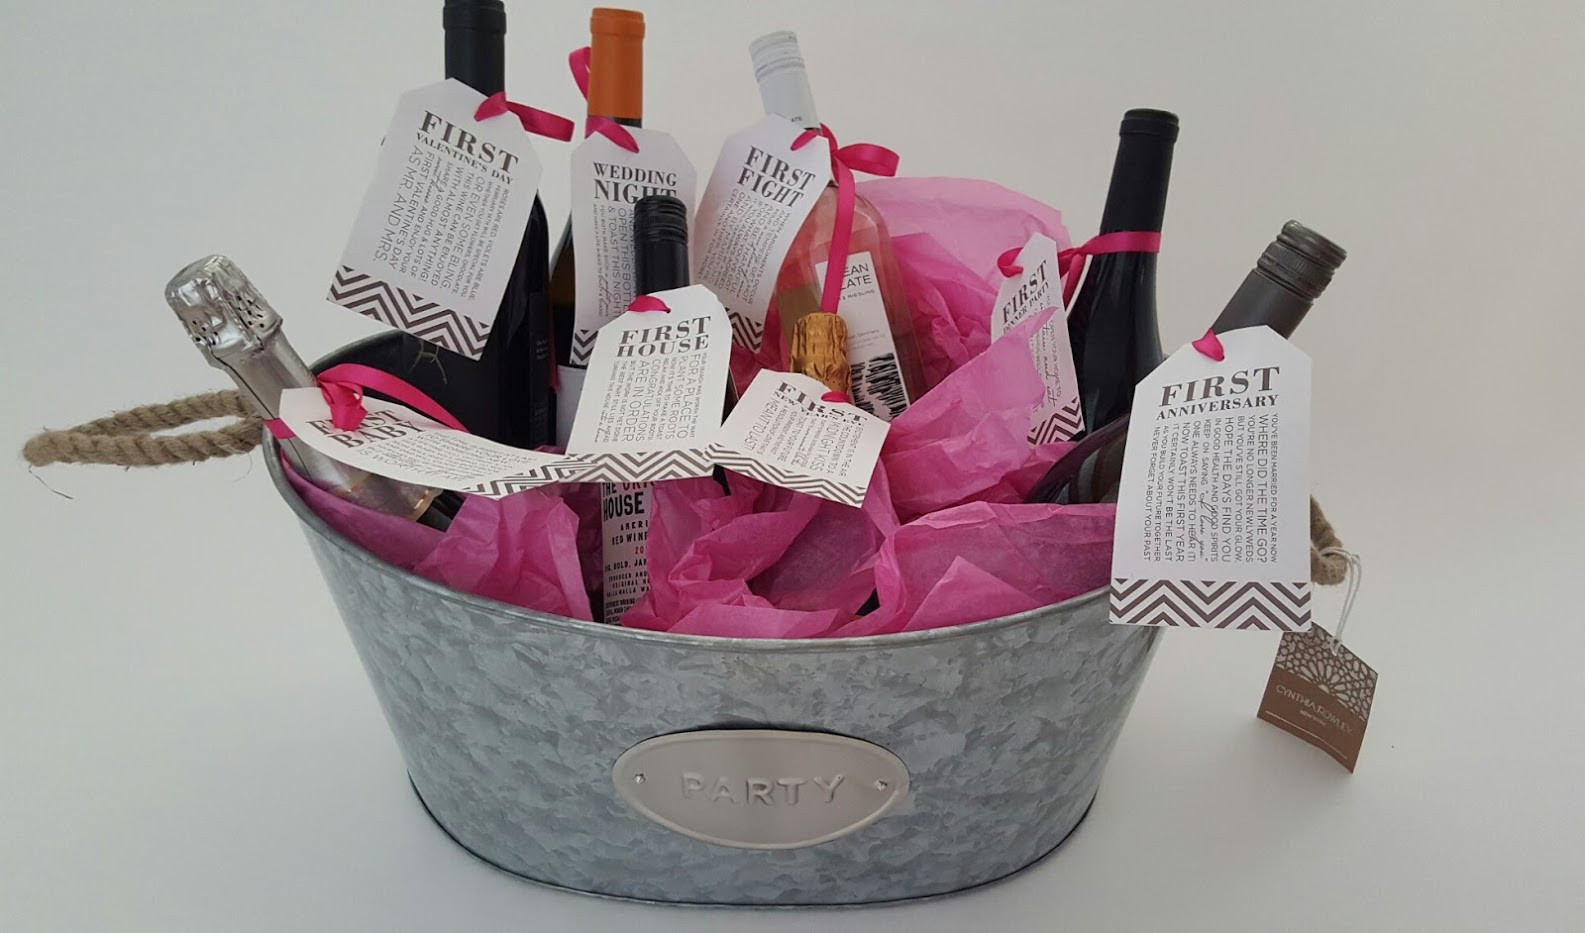 Ideas For Wedding Shower Gift
 Bridal Shower Gift DIY to Try A Basket of “Firsts” for